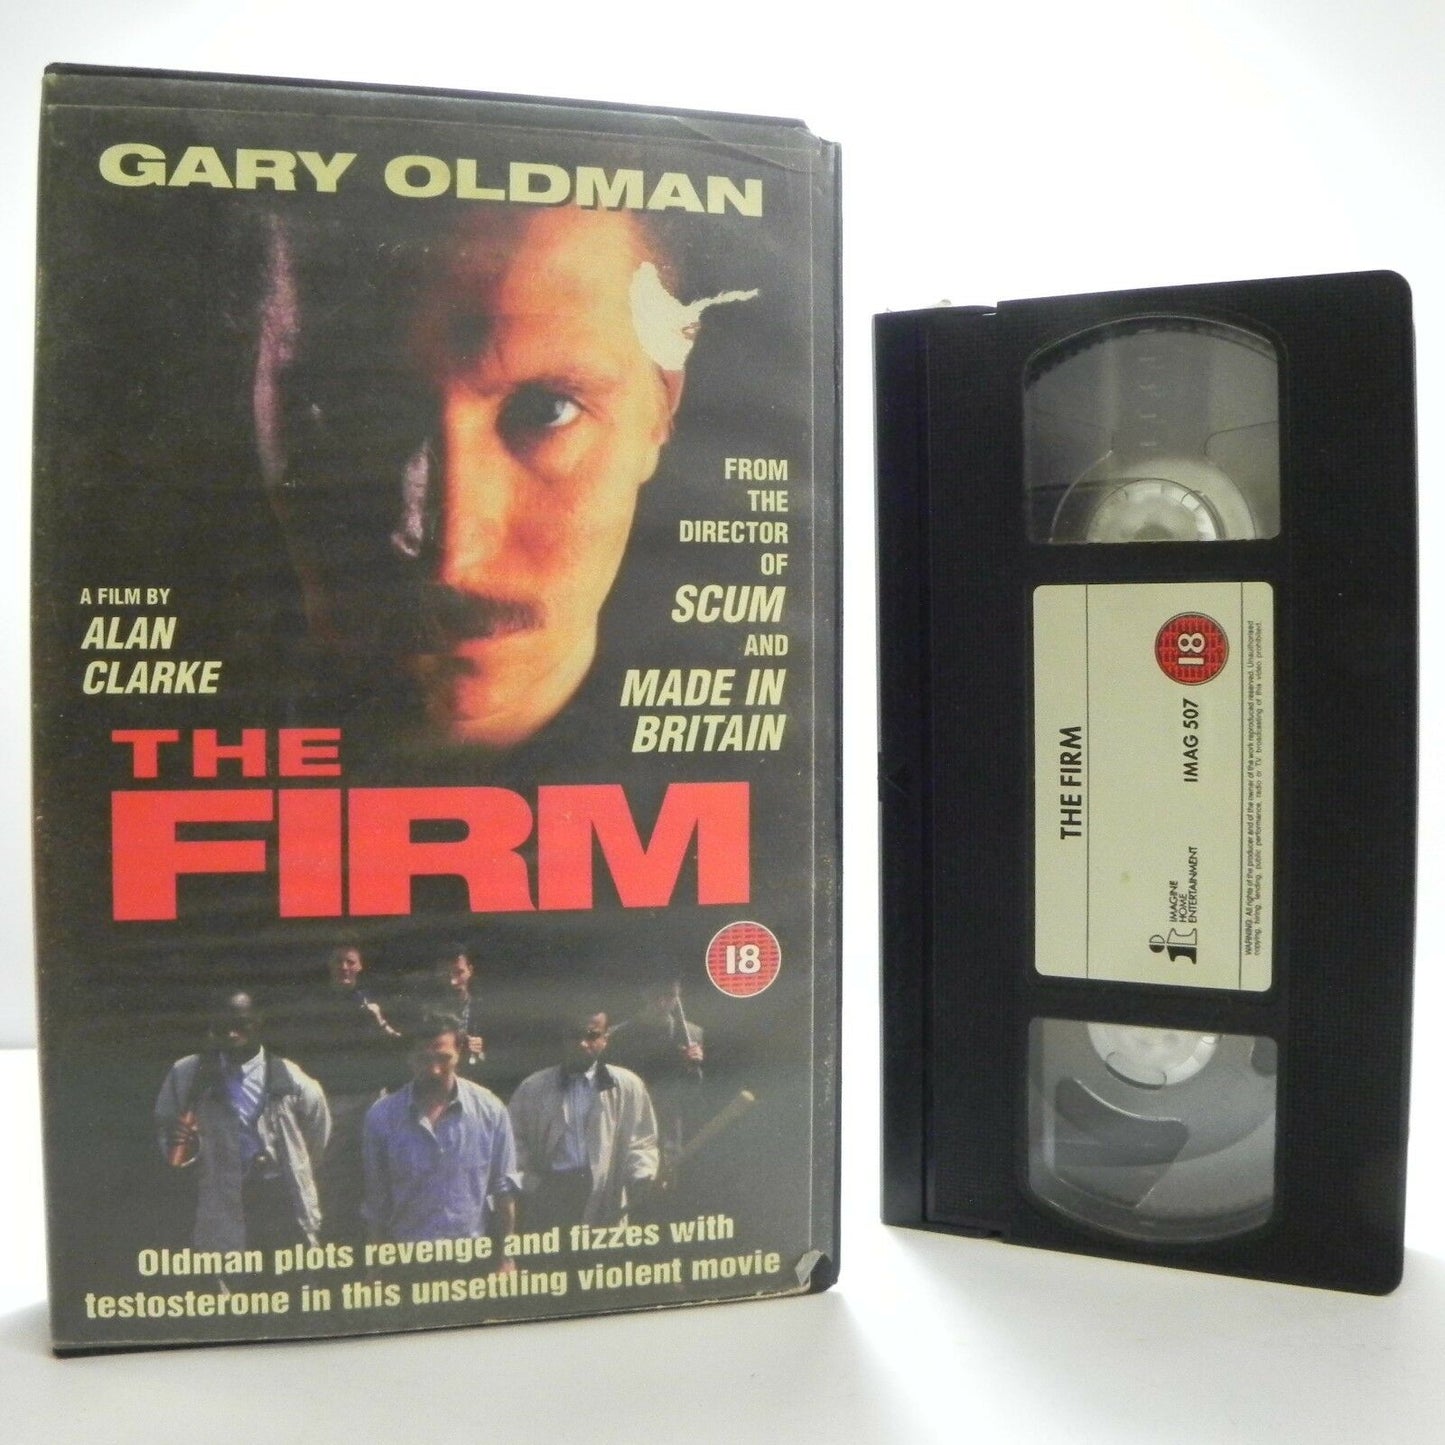 The Firm: By A.Clarke - Large Box - Thriller/Drama - Gary Oldman - Pal VHS-